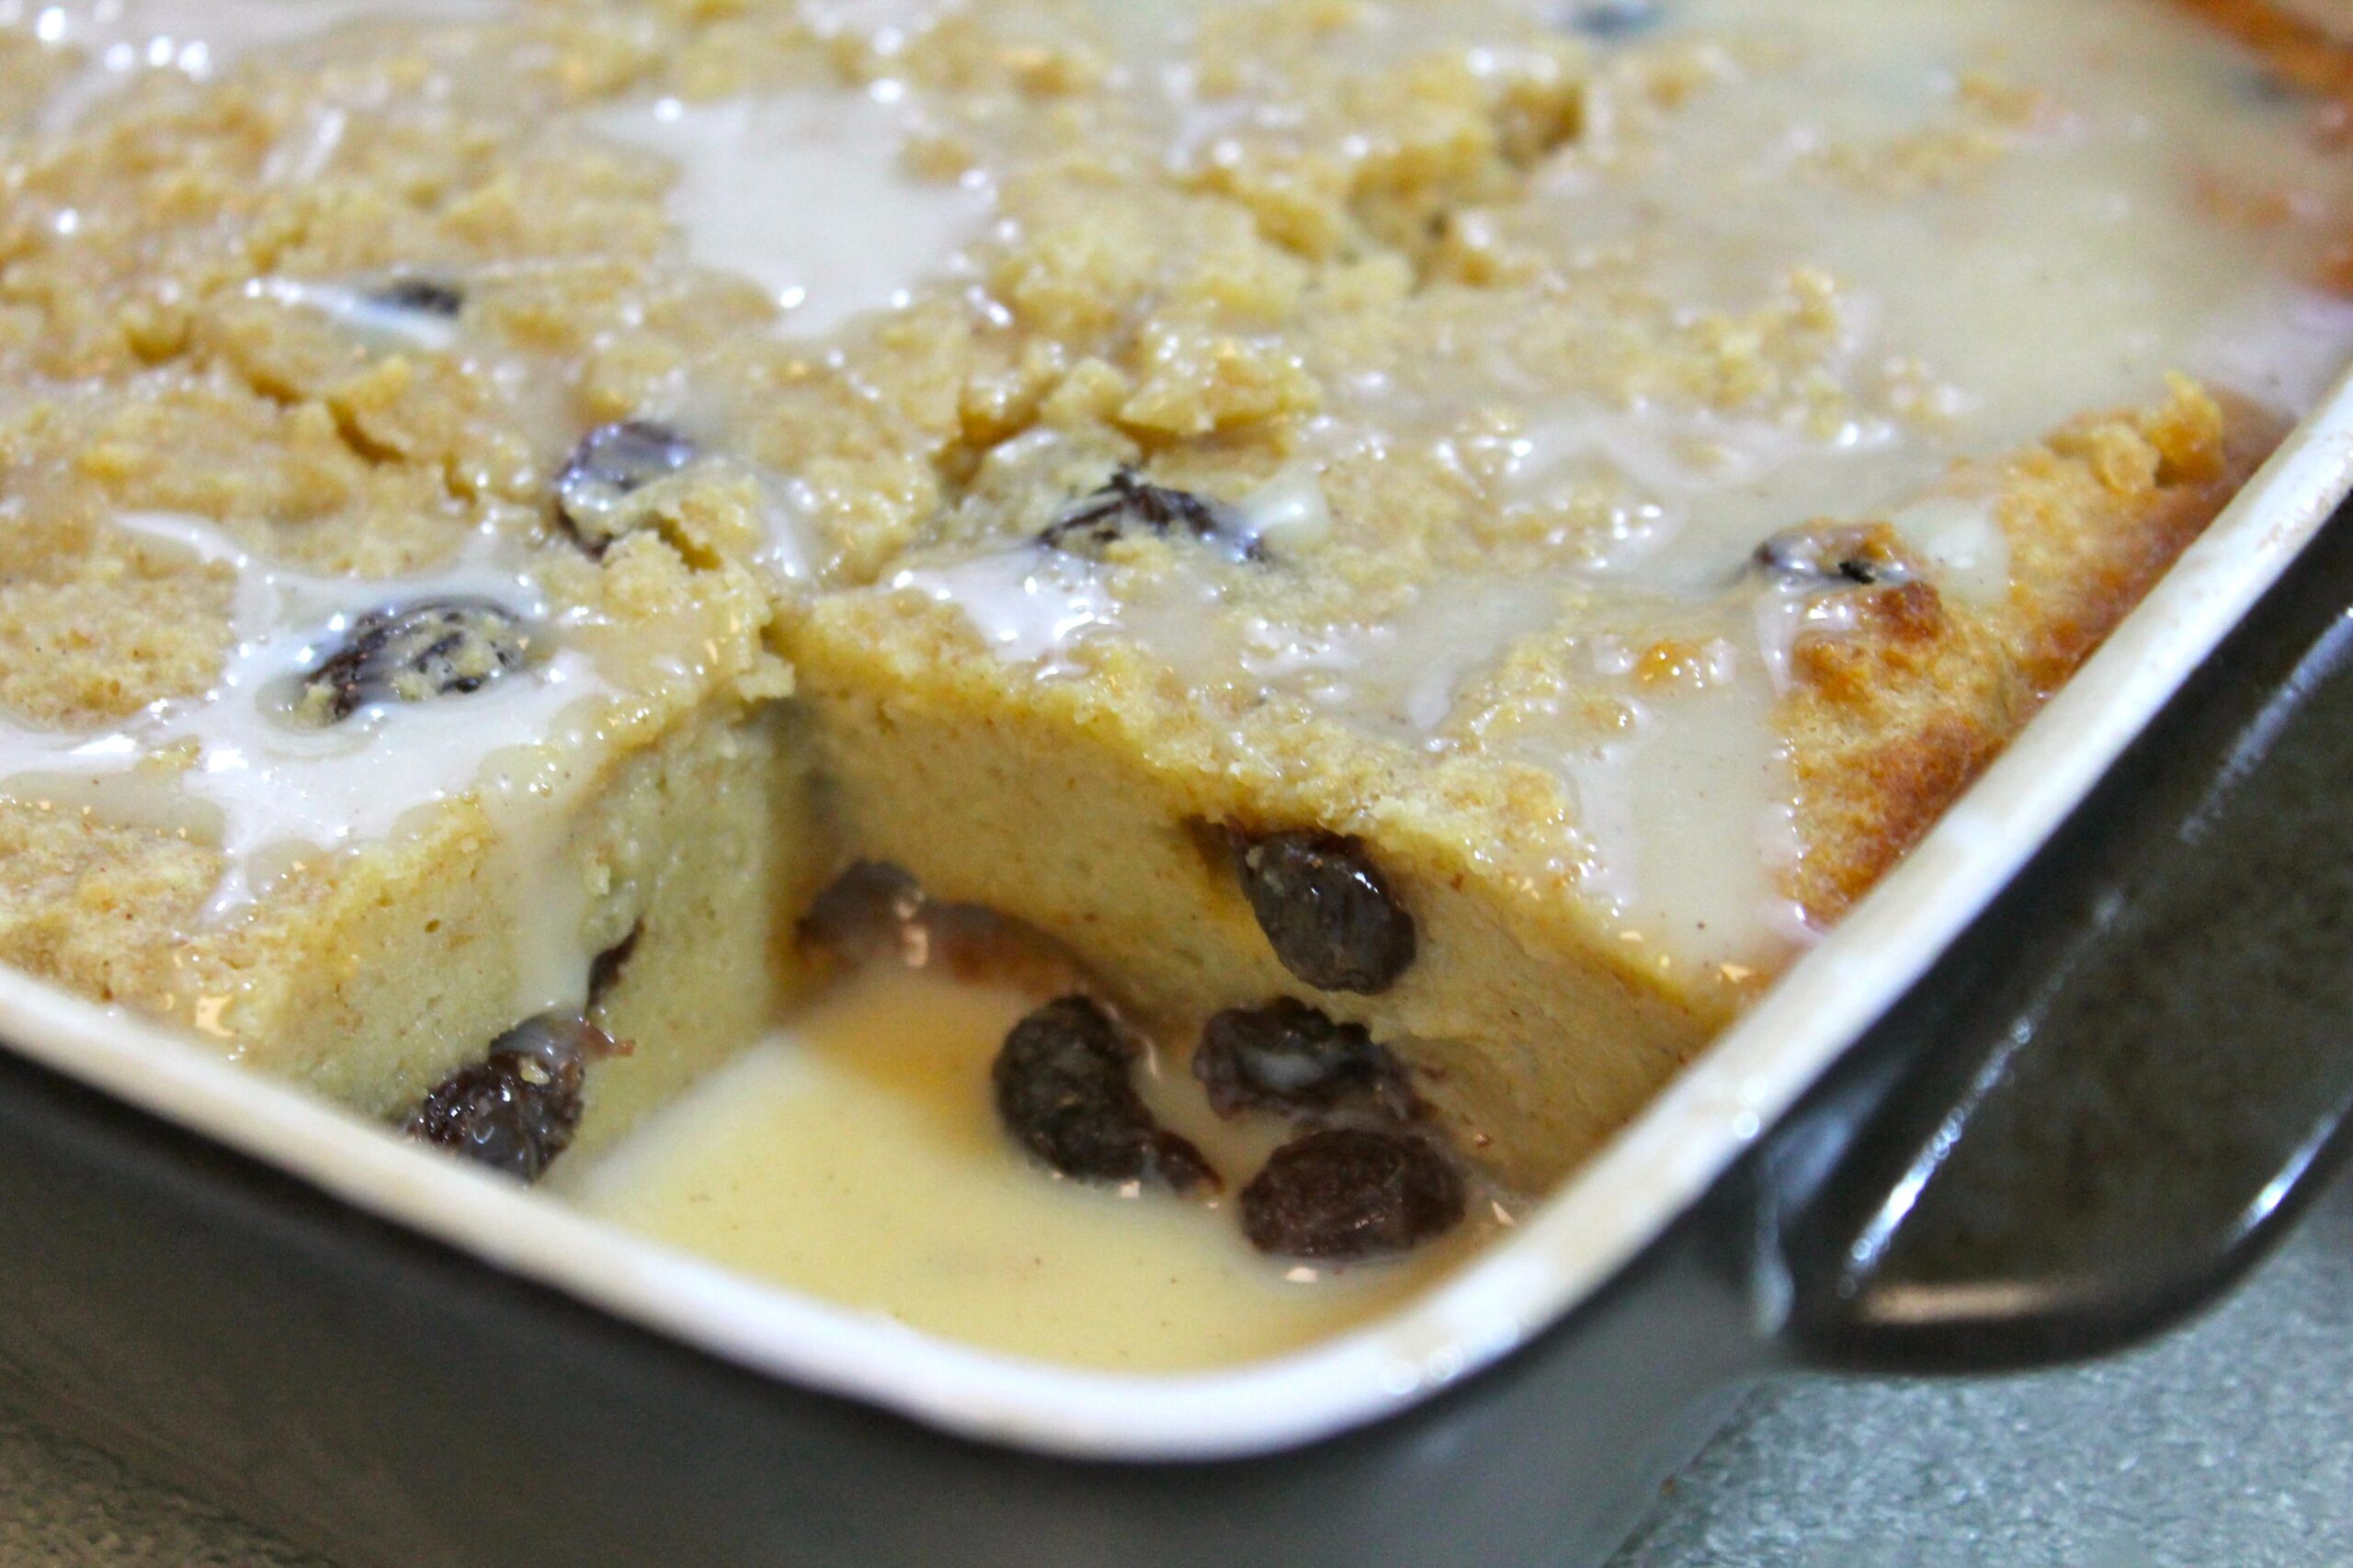  The perfect way to use up stale bread and turn it into a decadent dessert.